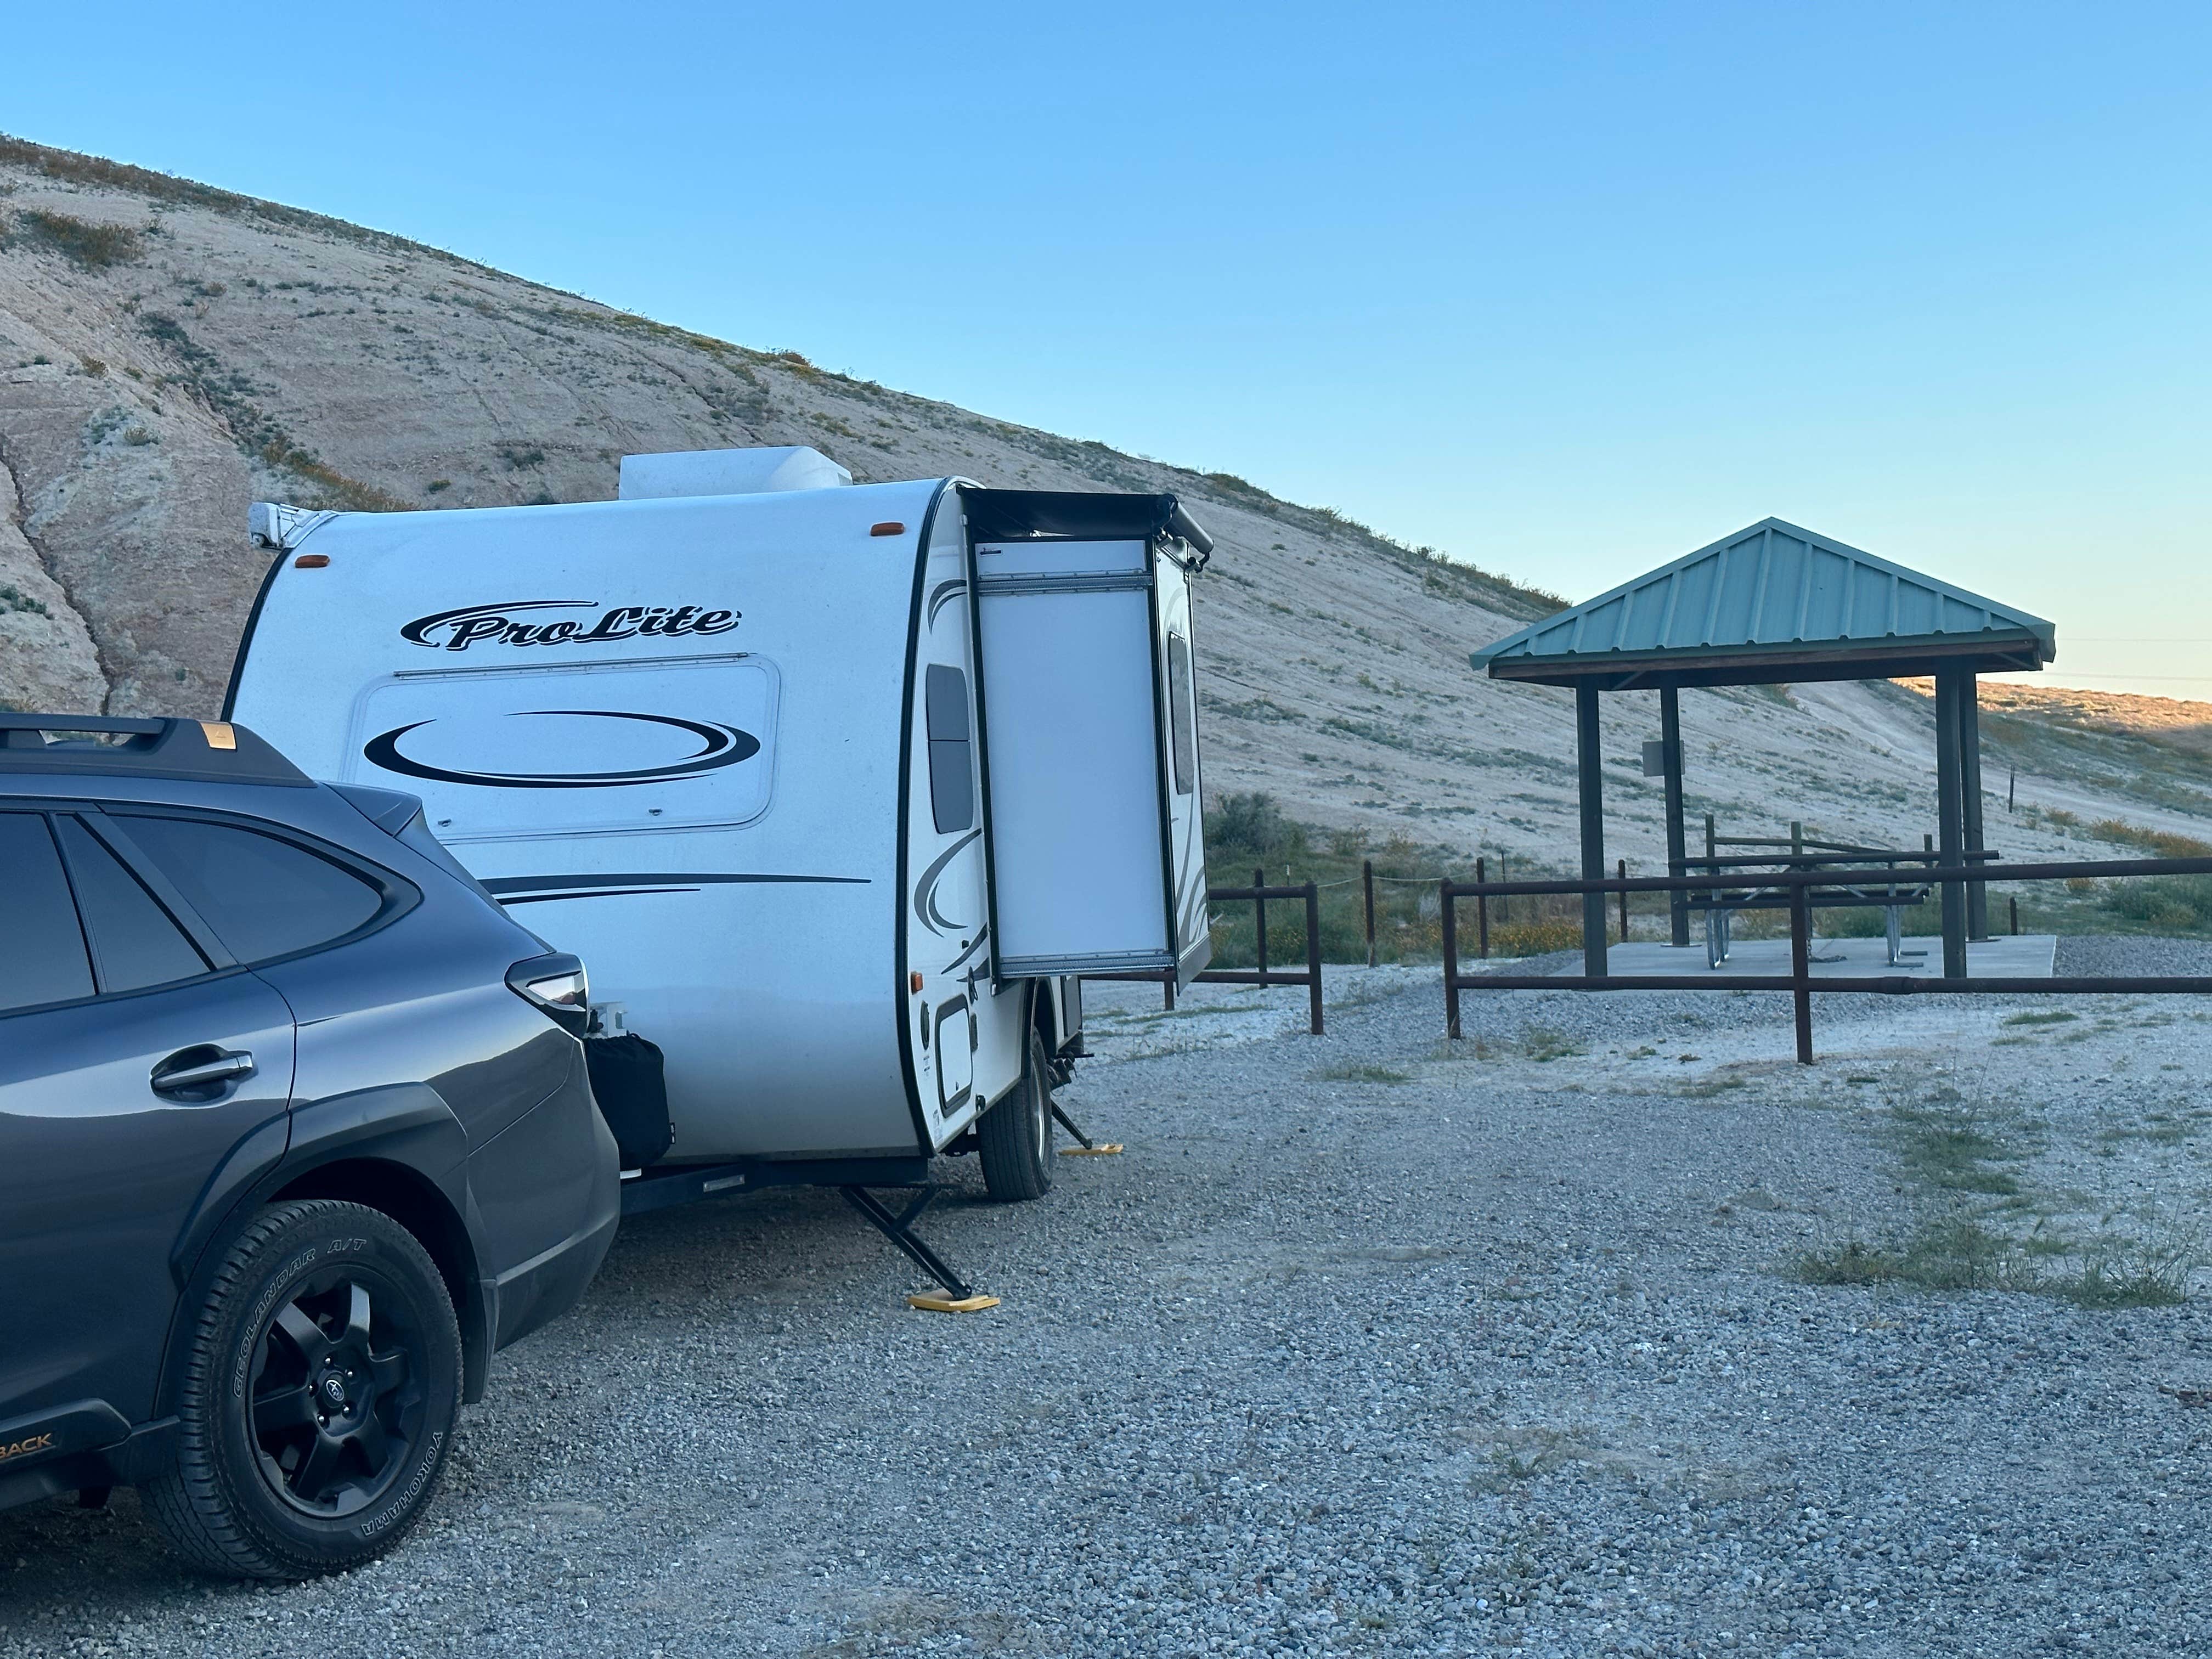 Camper submitted image from Tumey Hills Box Canyon - 5